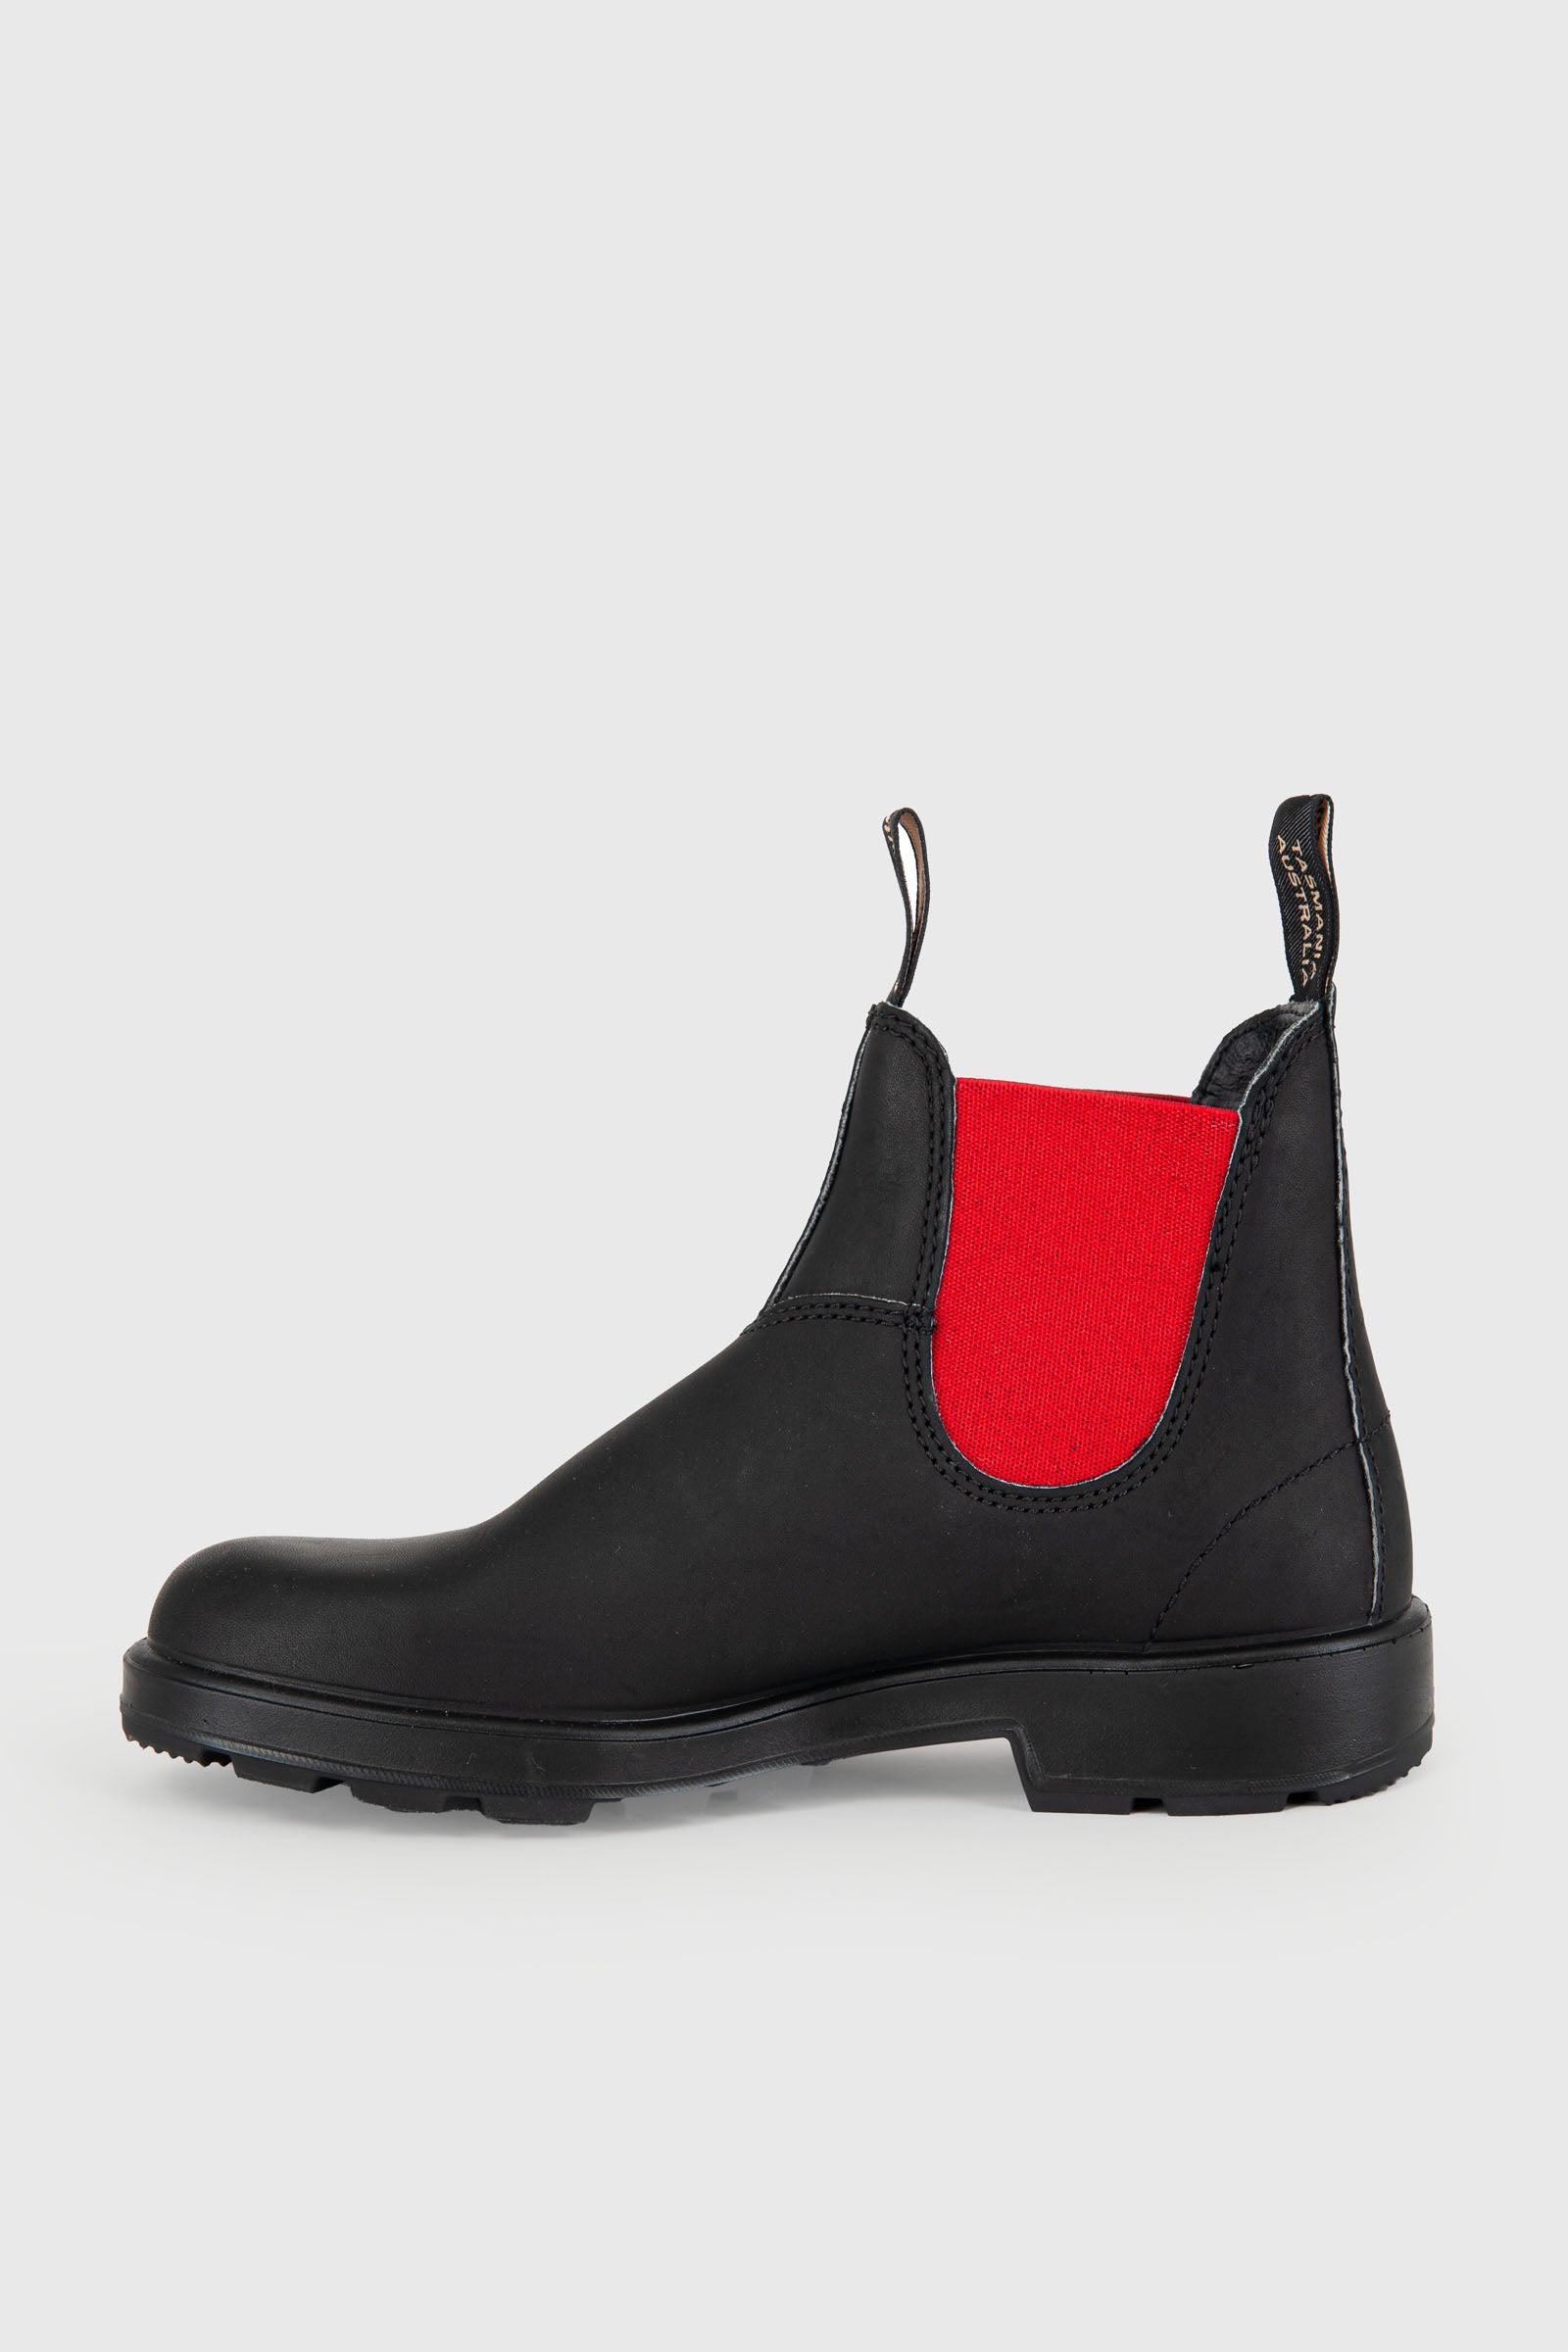 Blundstone Beatle Ankle Boot 508 Leather Black/Red - 7